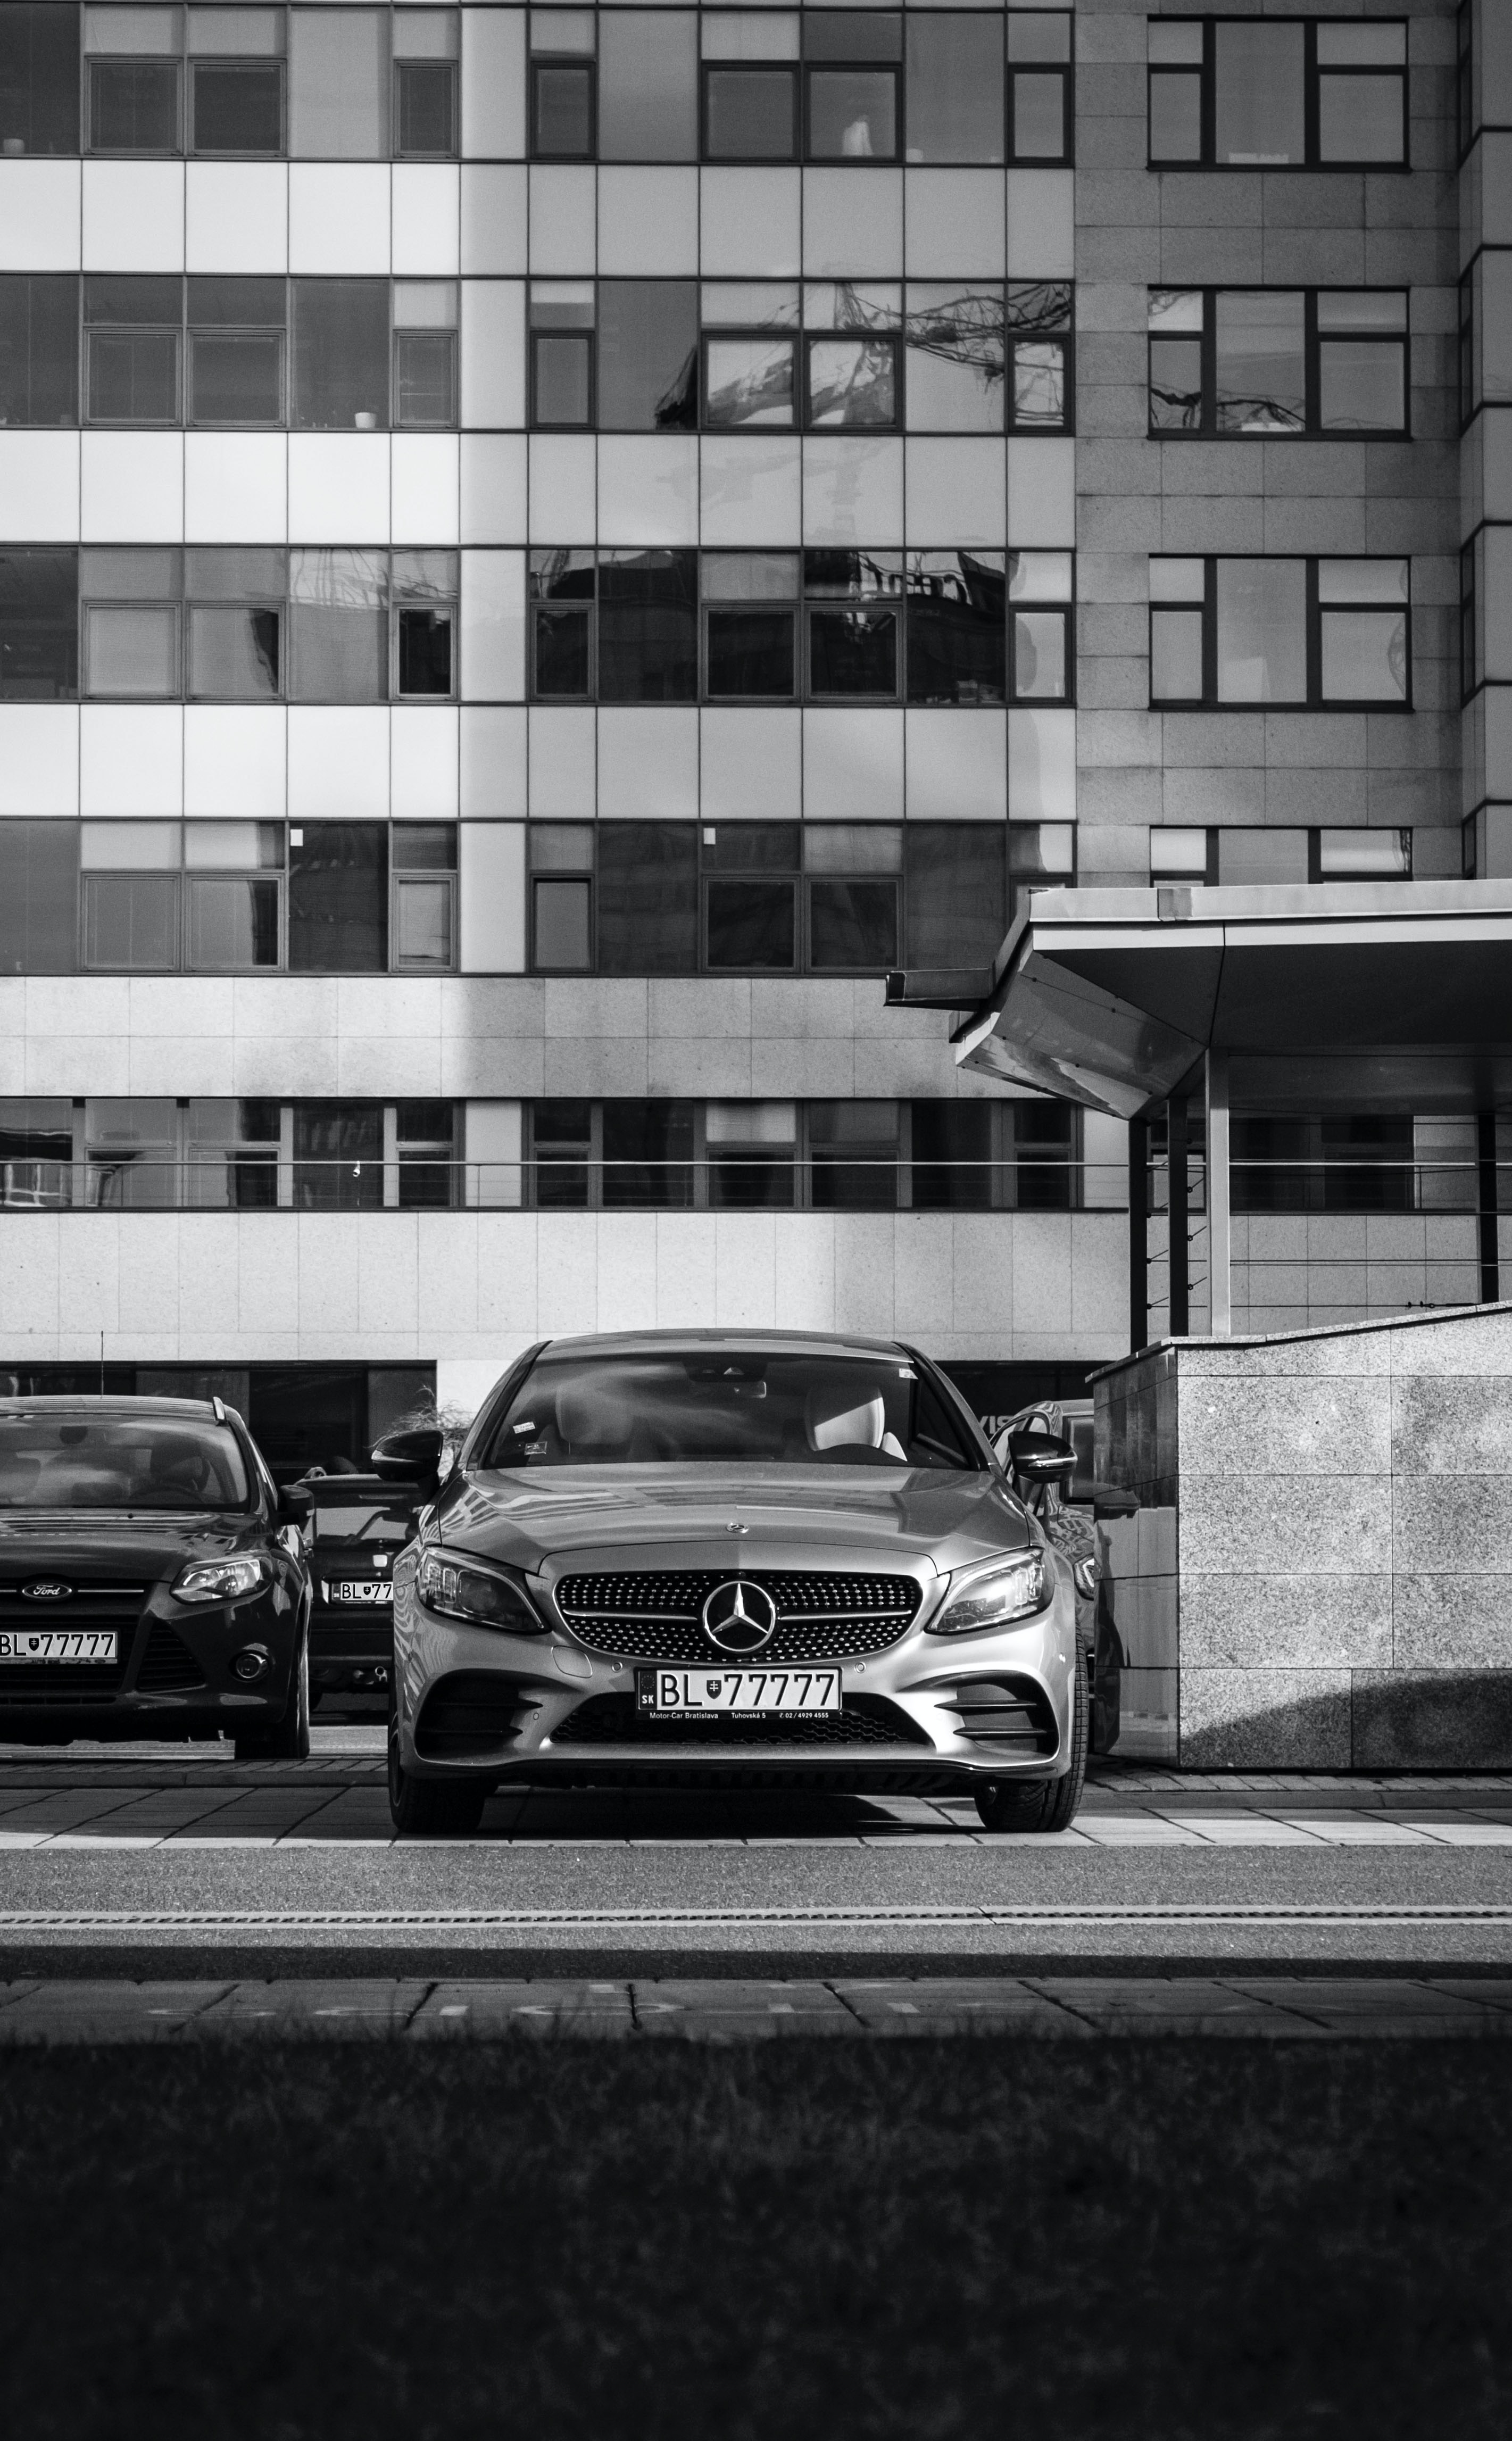 mercedes benz, cars, car, front view, bw, chb